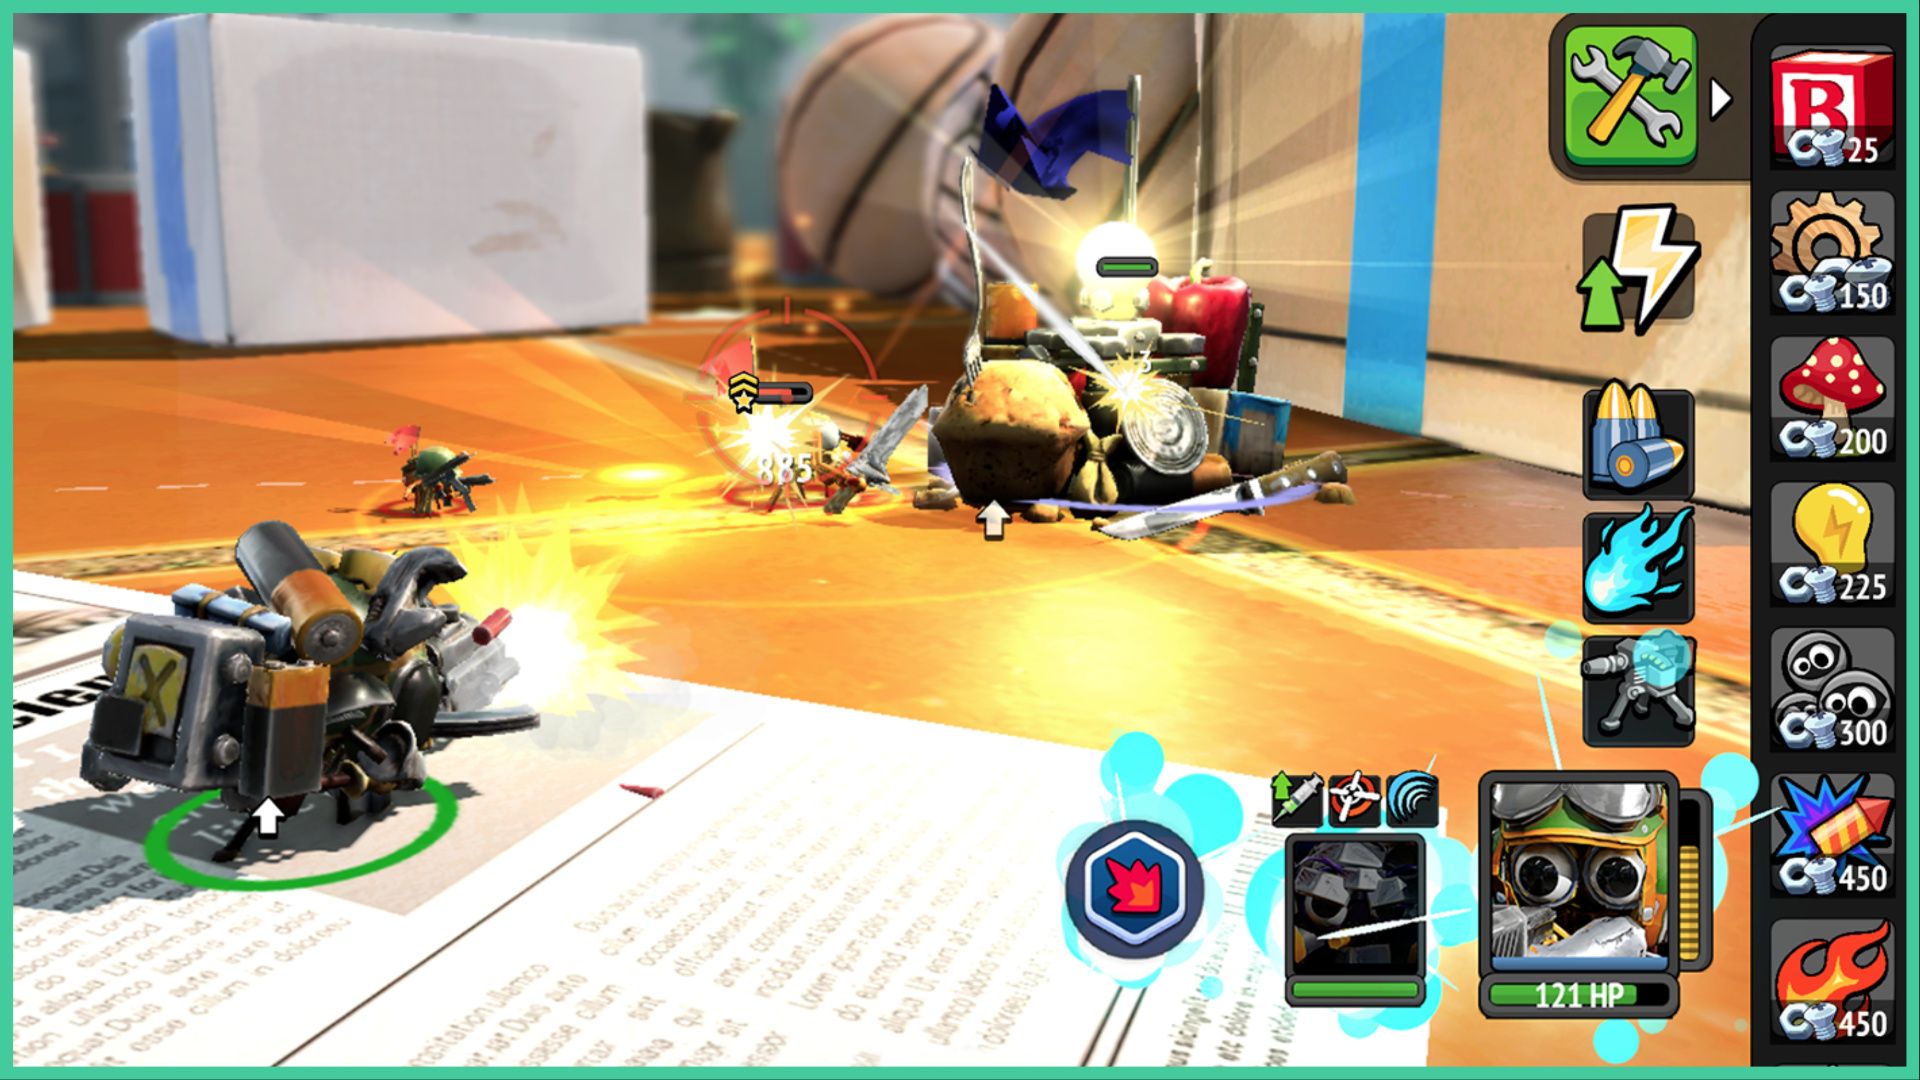 feature image for our bug heroes tower defense codes, the image features a screenshot of battle from the game, with bugs in mechanical gear as they fire toward each other on flooring by cardboard boxes and 2 basketballs, there is a muffin with a fork inside in front of one of the bugs as well as a pocket knife on the ground